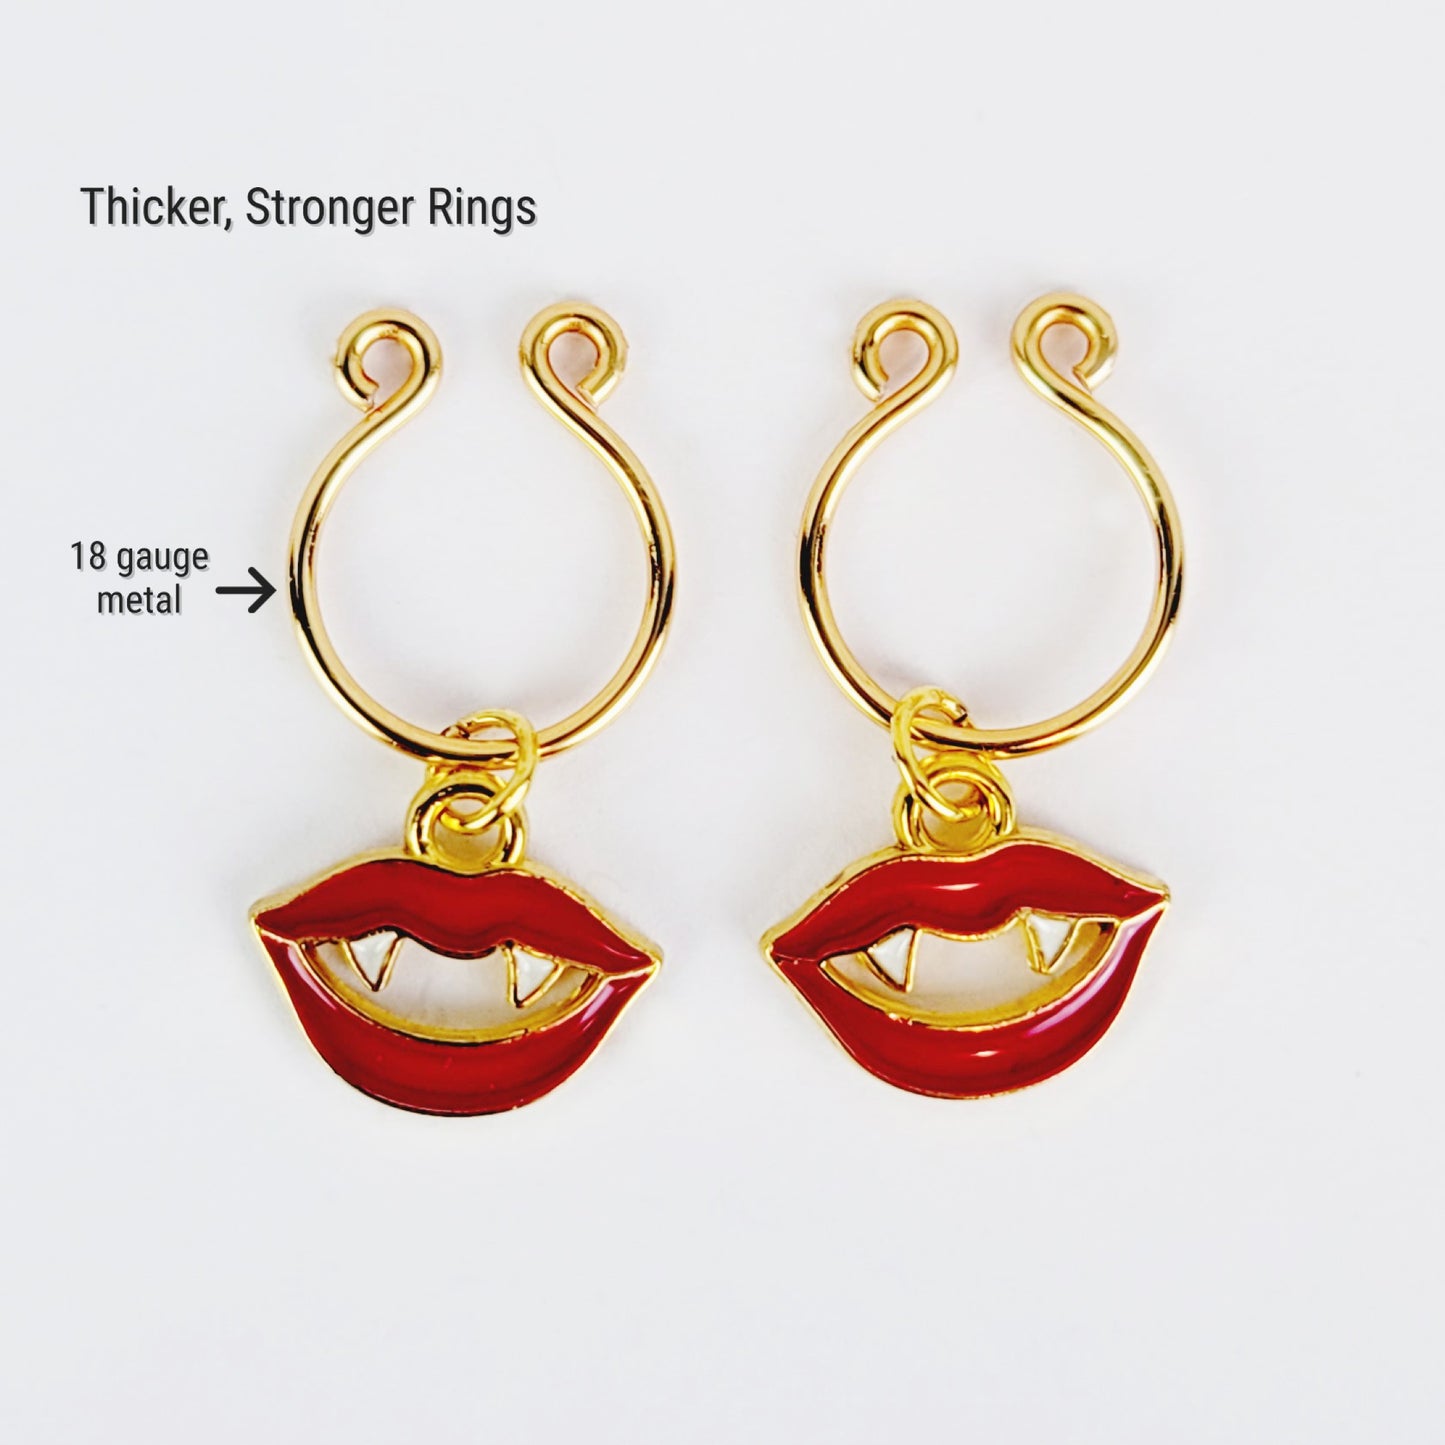 Non Piercing Nipple Rings with Vampire Lips, Gold. Thick Horseshoe Style Nipple Rings, Not Pierced. Faux Nipple Rings for Halloween. MATURE